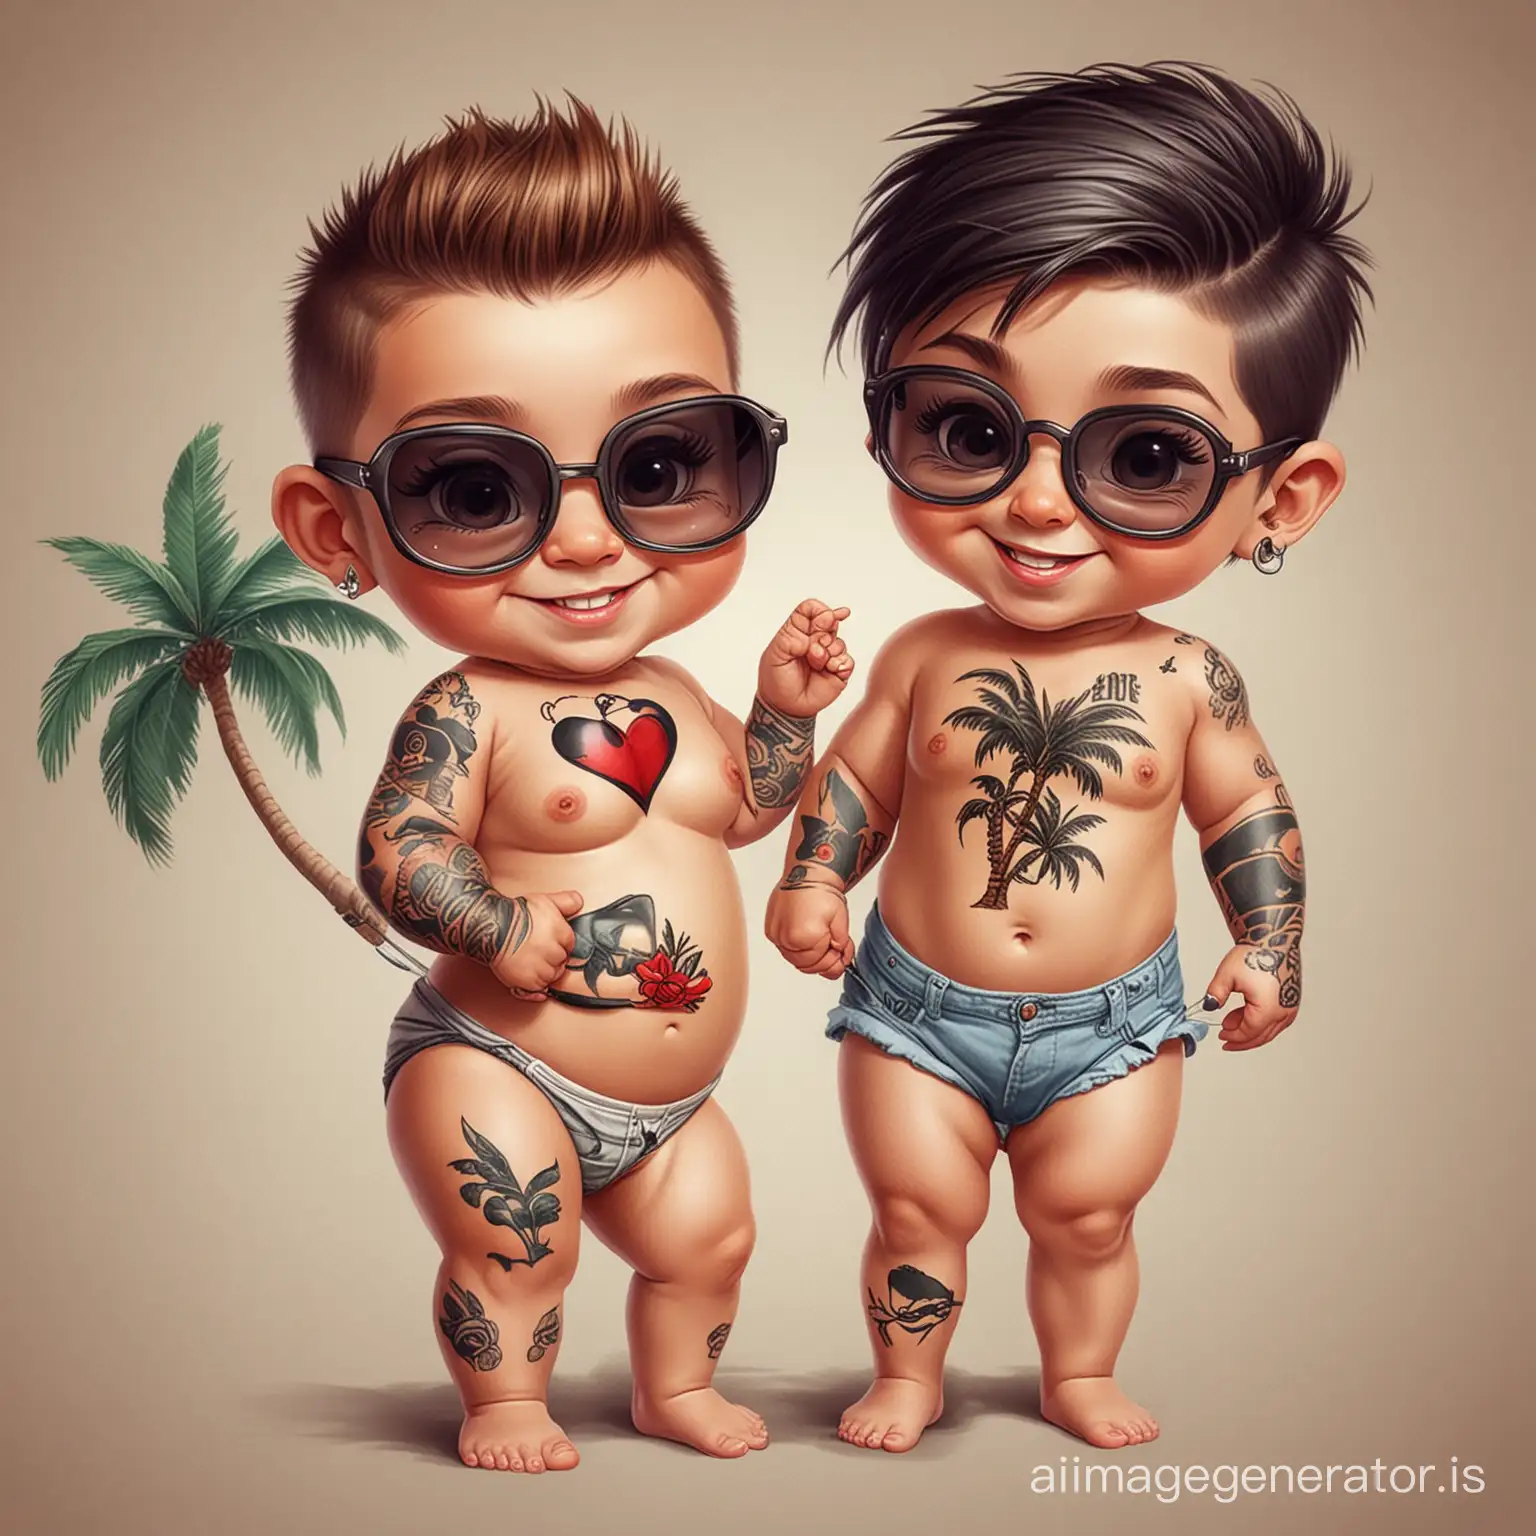 Cheerful-Babies-in-Diapers-with-Cartoon-Tattoos-and-Sunglasses